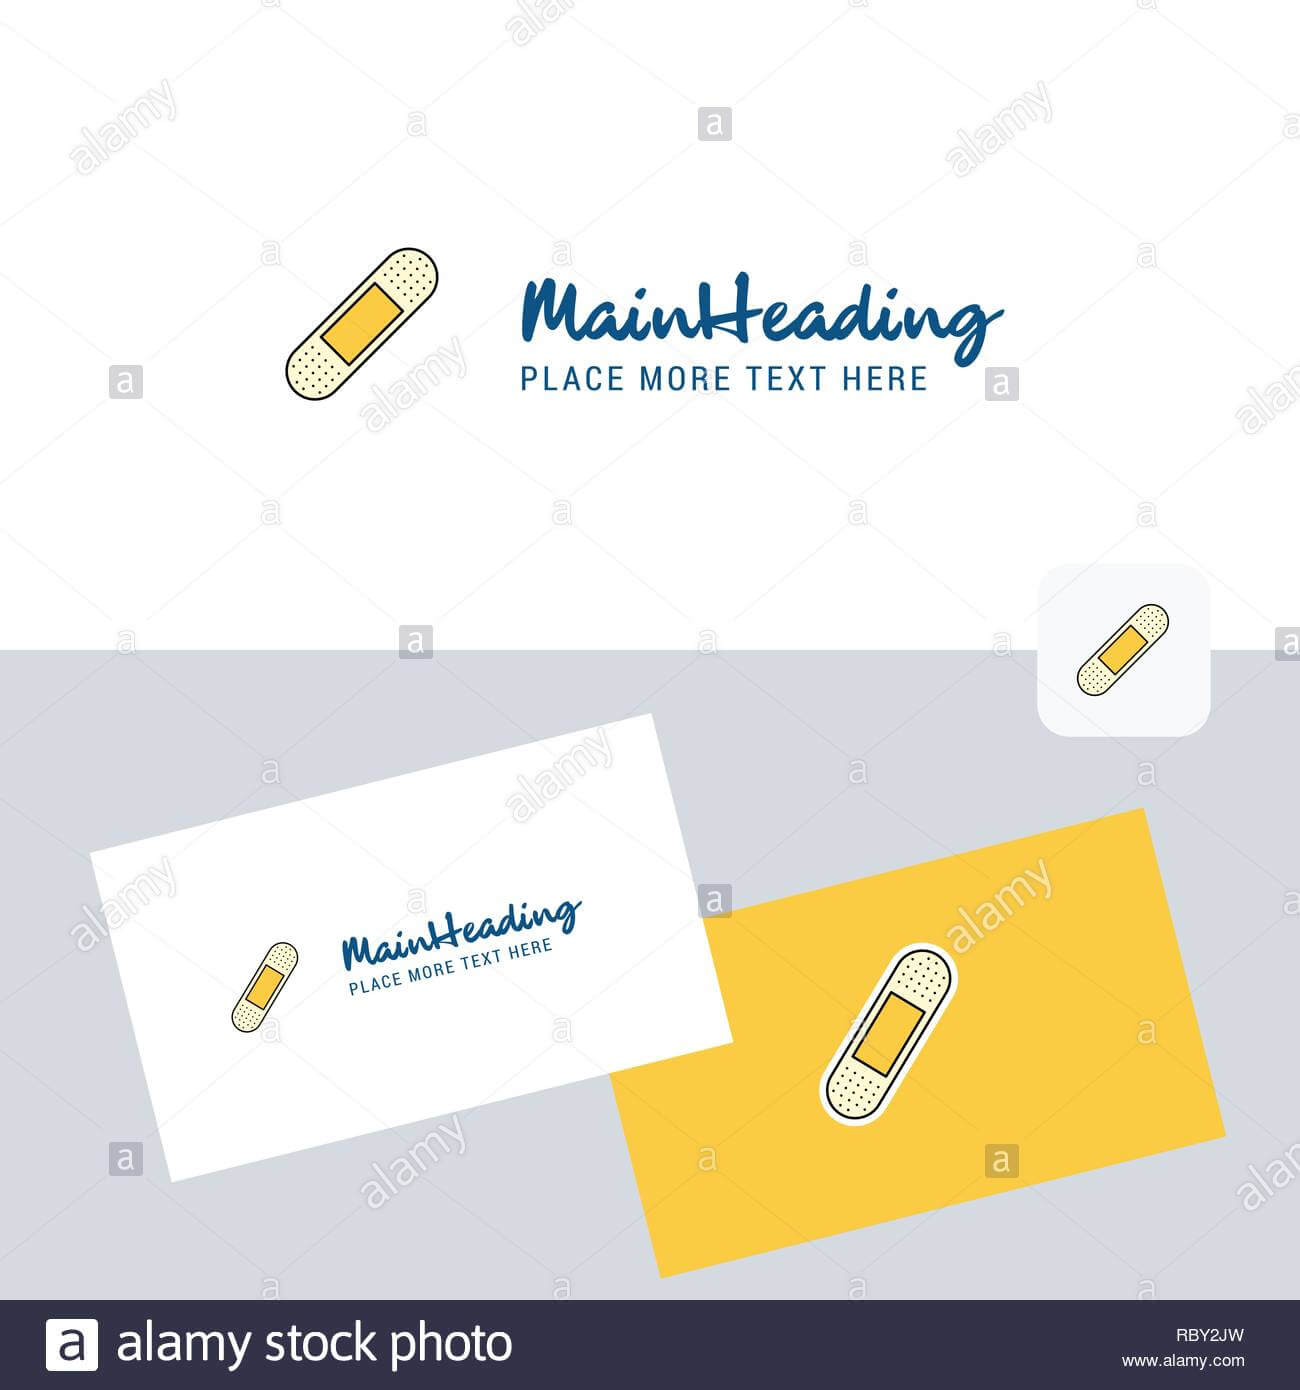 Plaster Vector Logotype With Business Card Template. Elegant Within Plastering Business Cards Templates